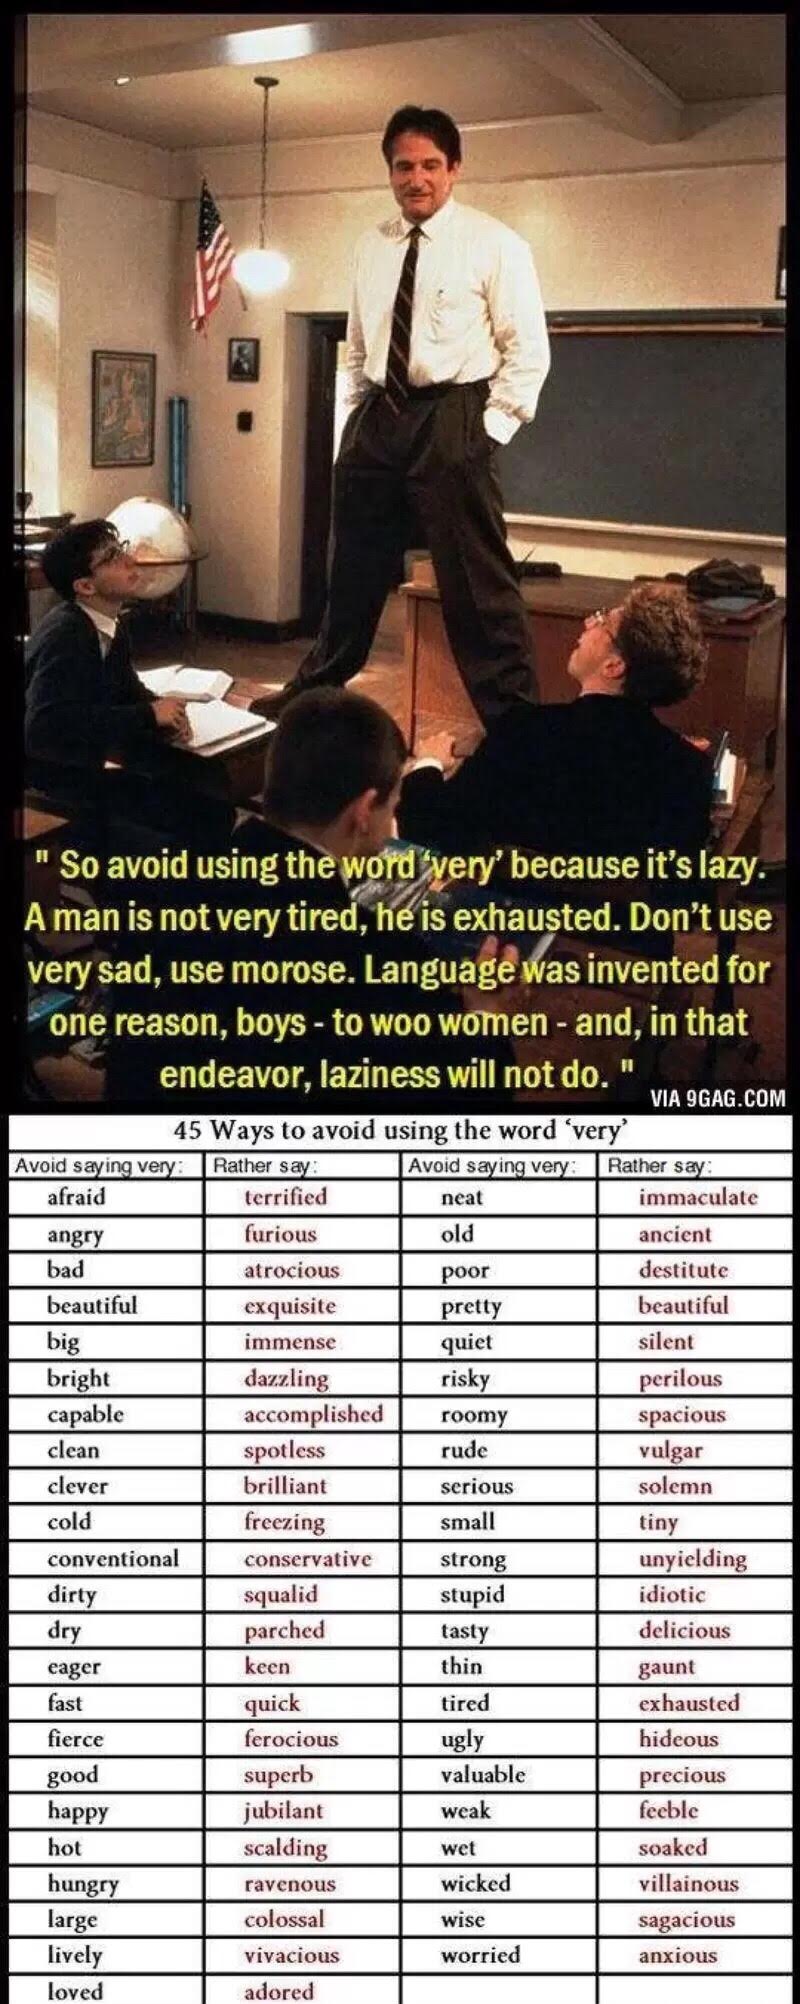 robin williams dead poets society quote - "So avoid using the word 'very' because it's lazy. A man is not very tired, he is exhausted. Don't use very sad, use morose. Language was invented for one reason, boys to woo women and, in that endeavor, laziness 